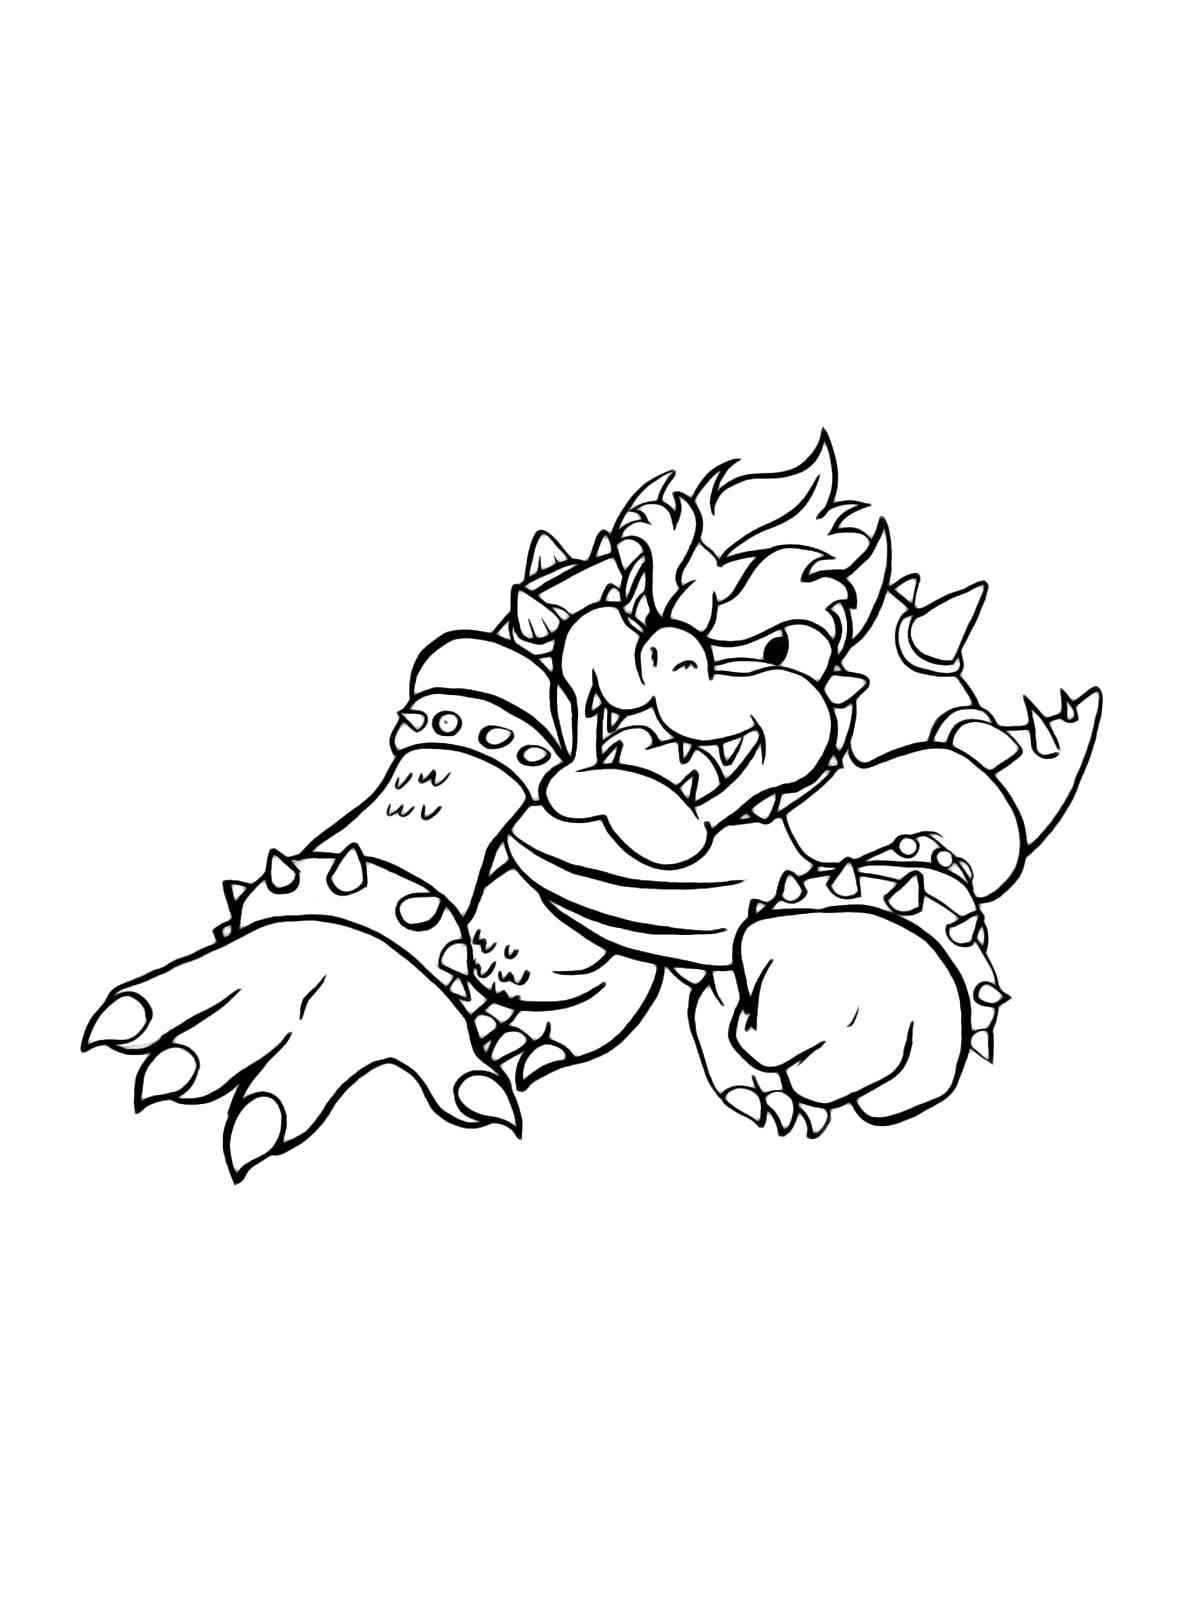 Bowser Attack coloring page